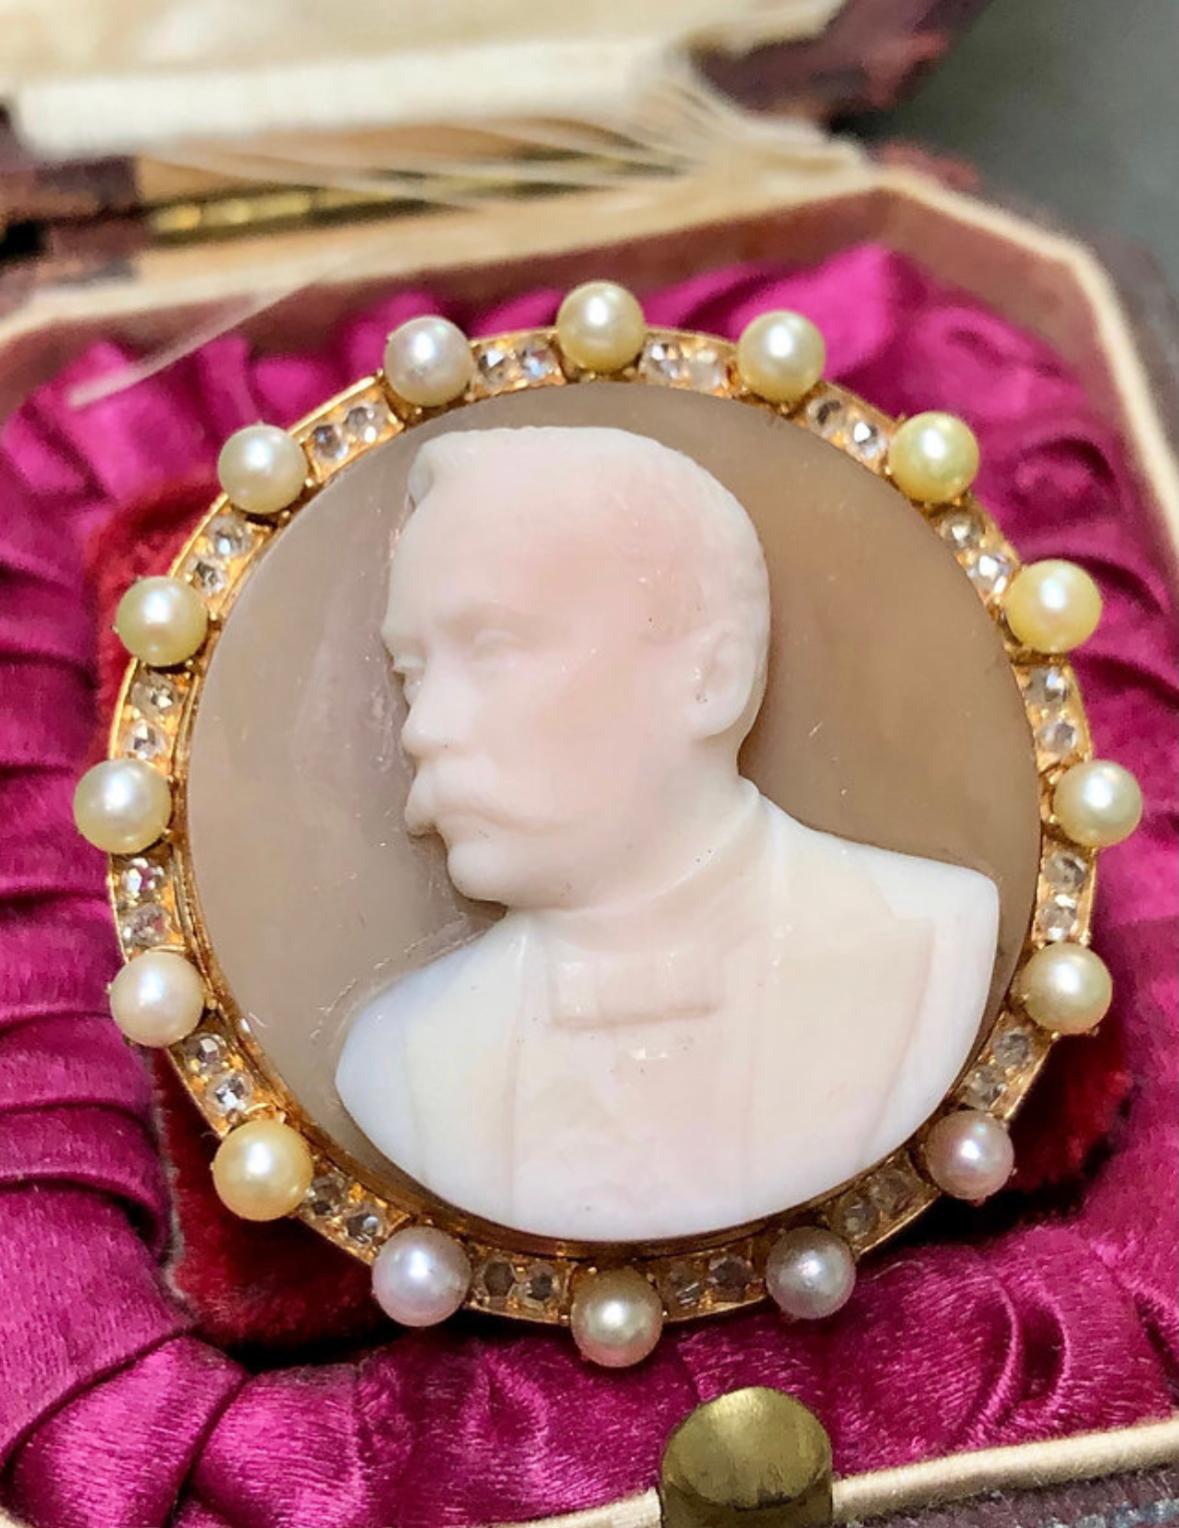 Beautifully made original Victorian high-relief carnelian hard stone cameo done in 14K surrounded by natural seed pearls and rose cut diamonds.

Dimensions
1 1/2” in diameter.

Condition
No chips to the stone and all diamonds/pearls are secure and